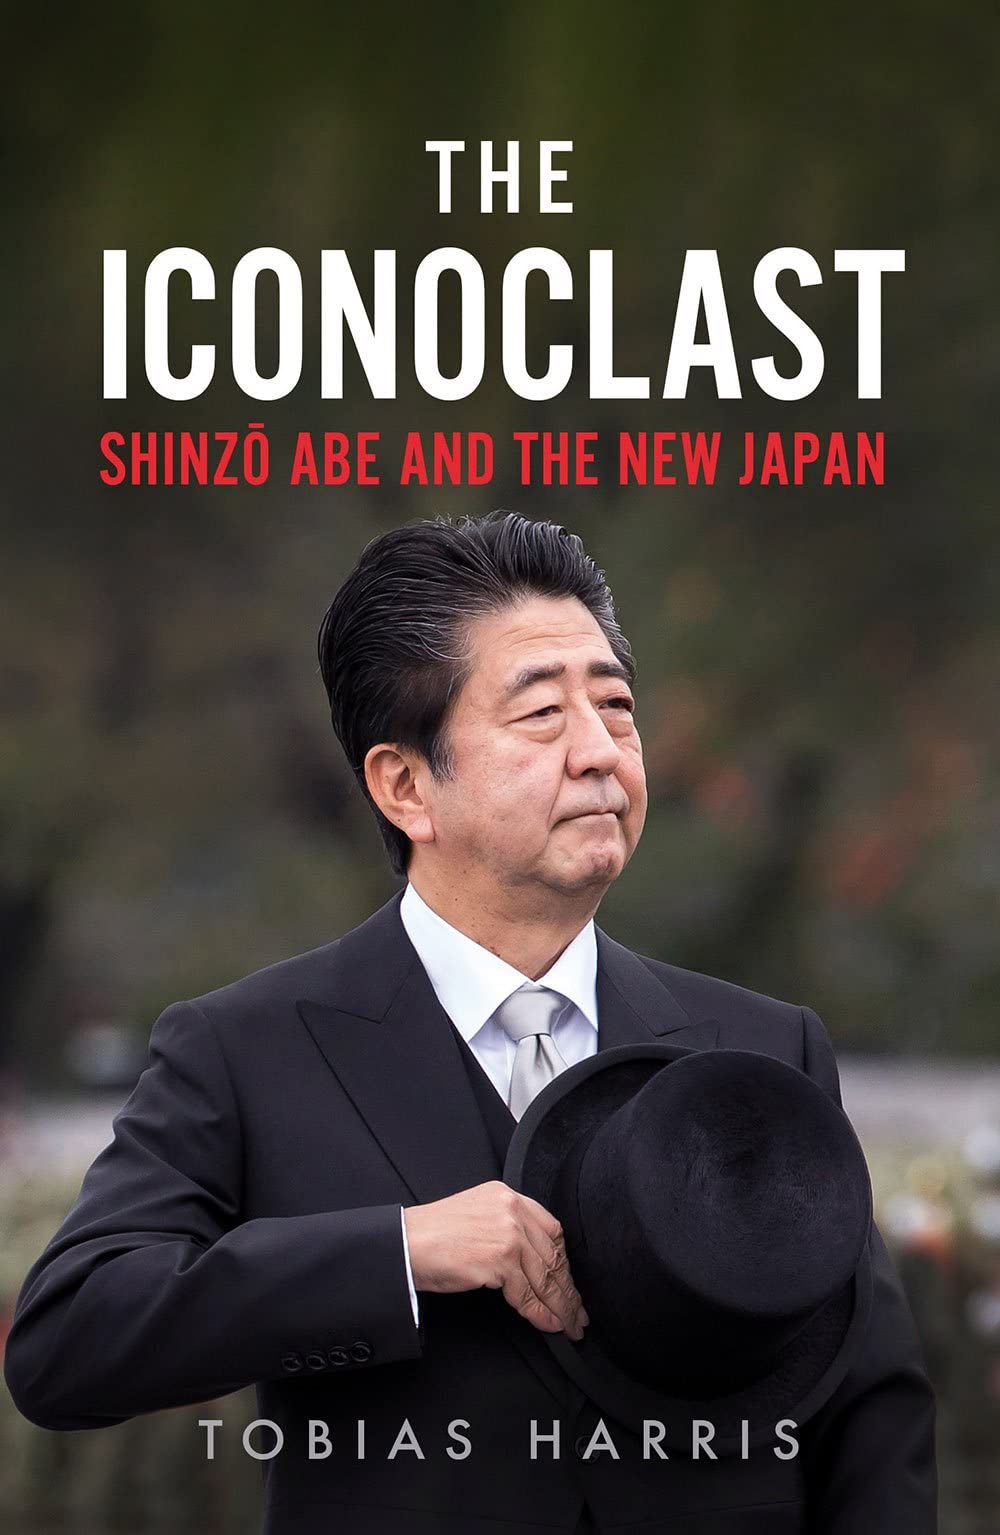 Shinzo Abe and the New Japan